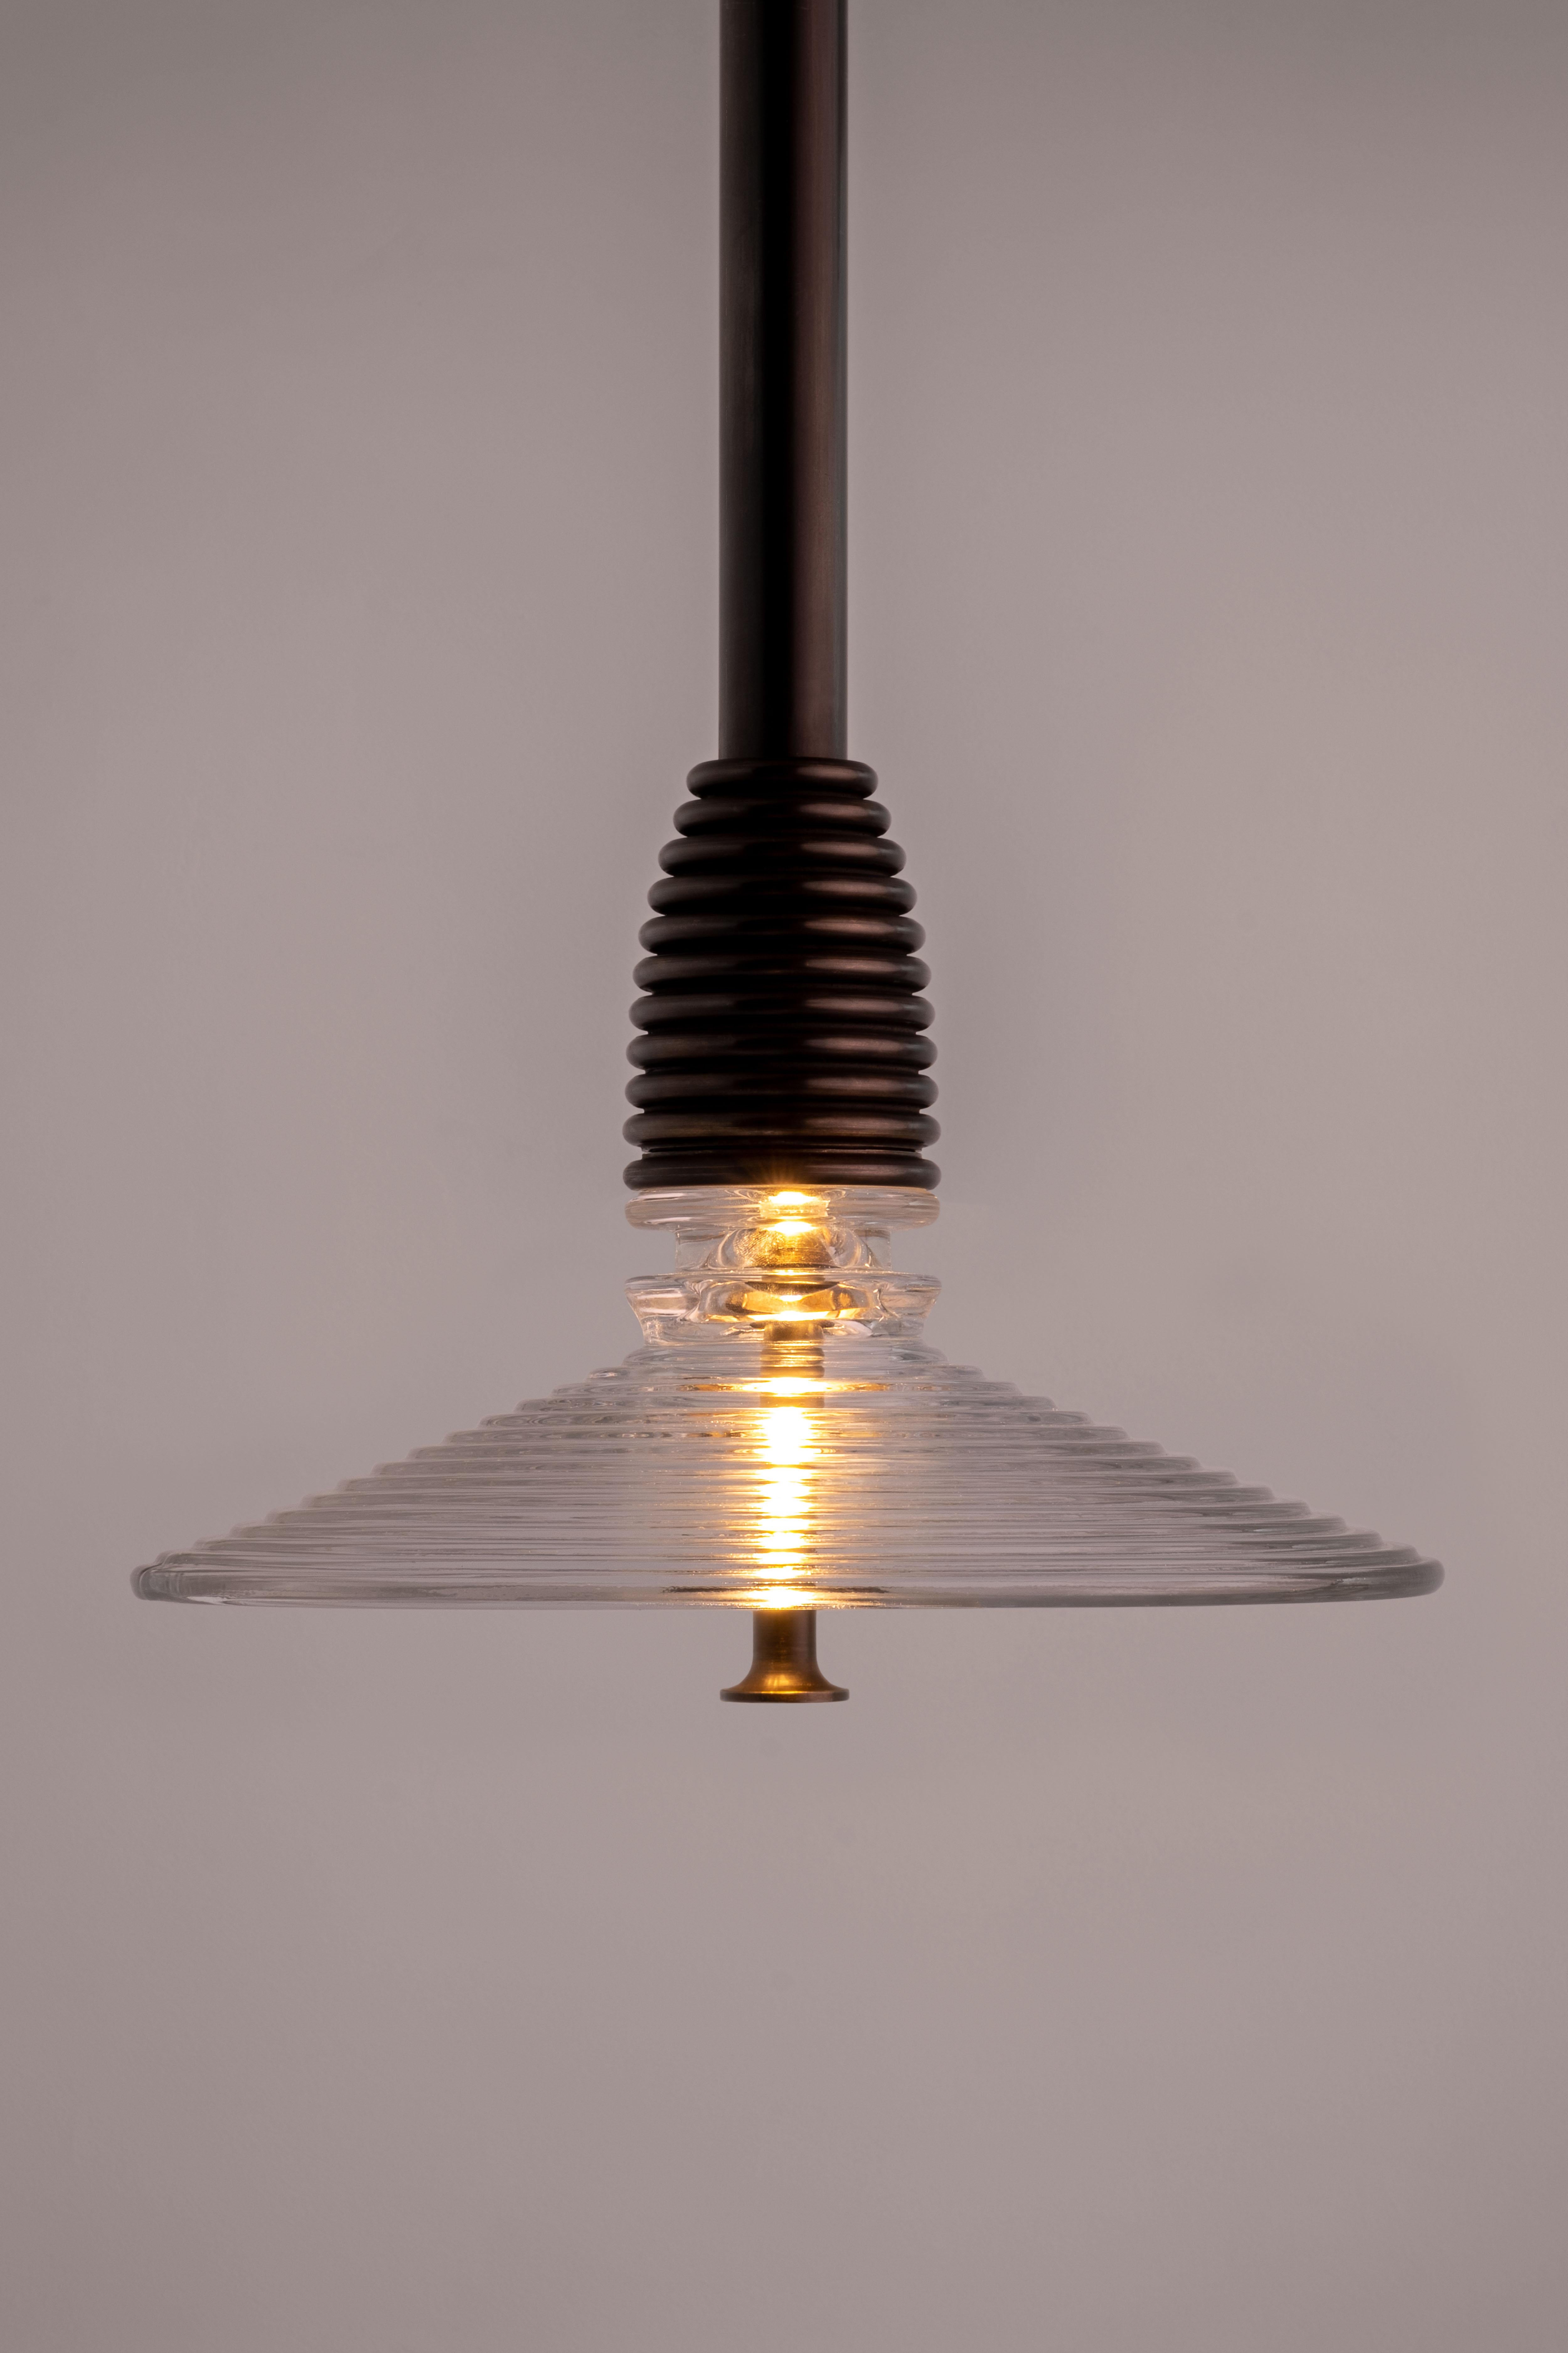 The Insulator 'B' Pendant in polished brass and clear glass by NOVOCASTRIAN deco For Sale 9